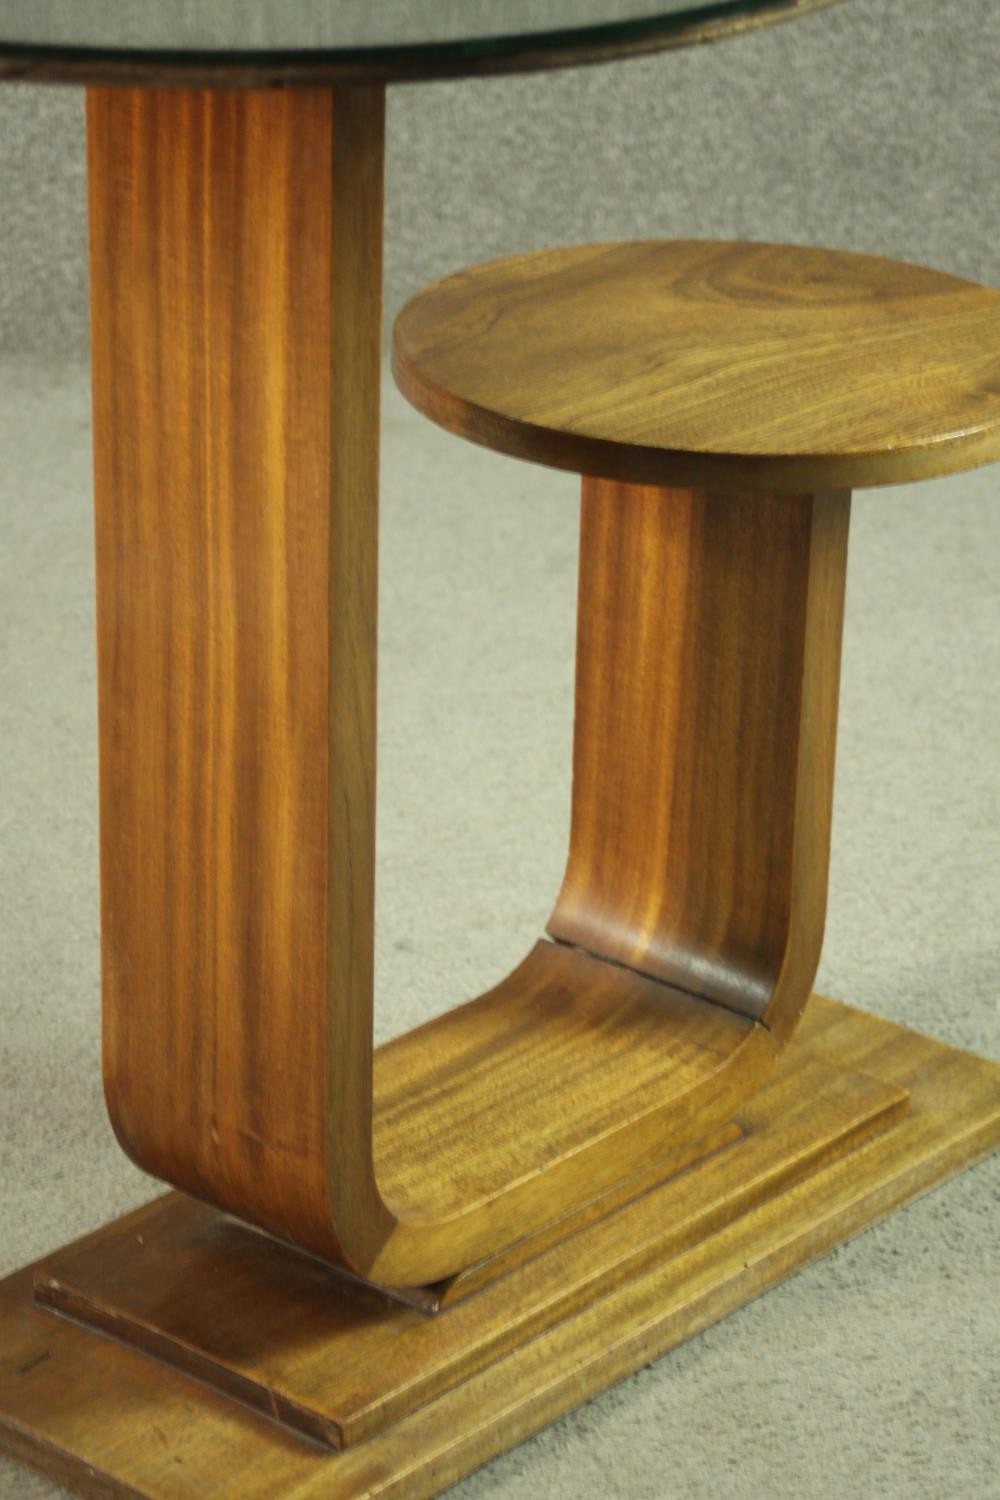 An Art Deco teak table and stool, with a circular glass table top, on a support which curves up to a - Image 5 of 8